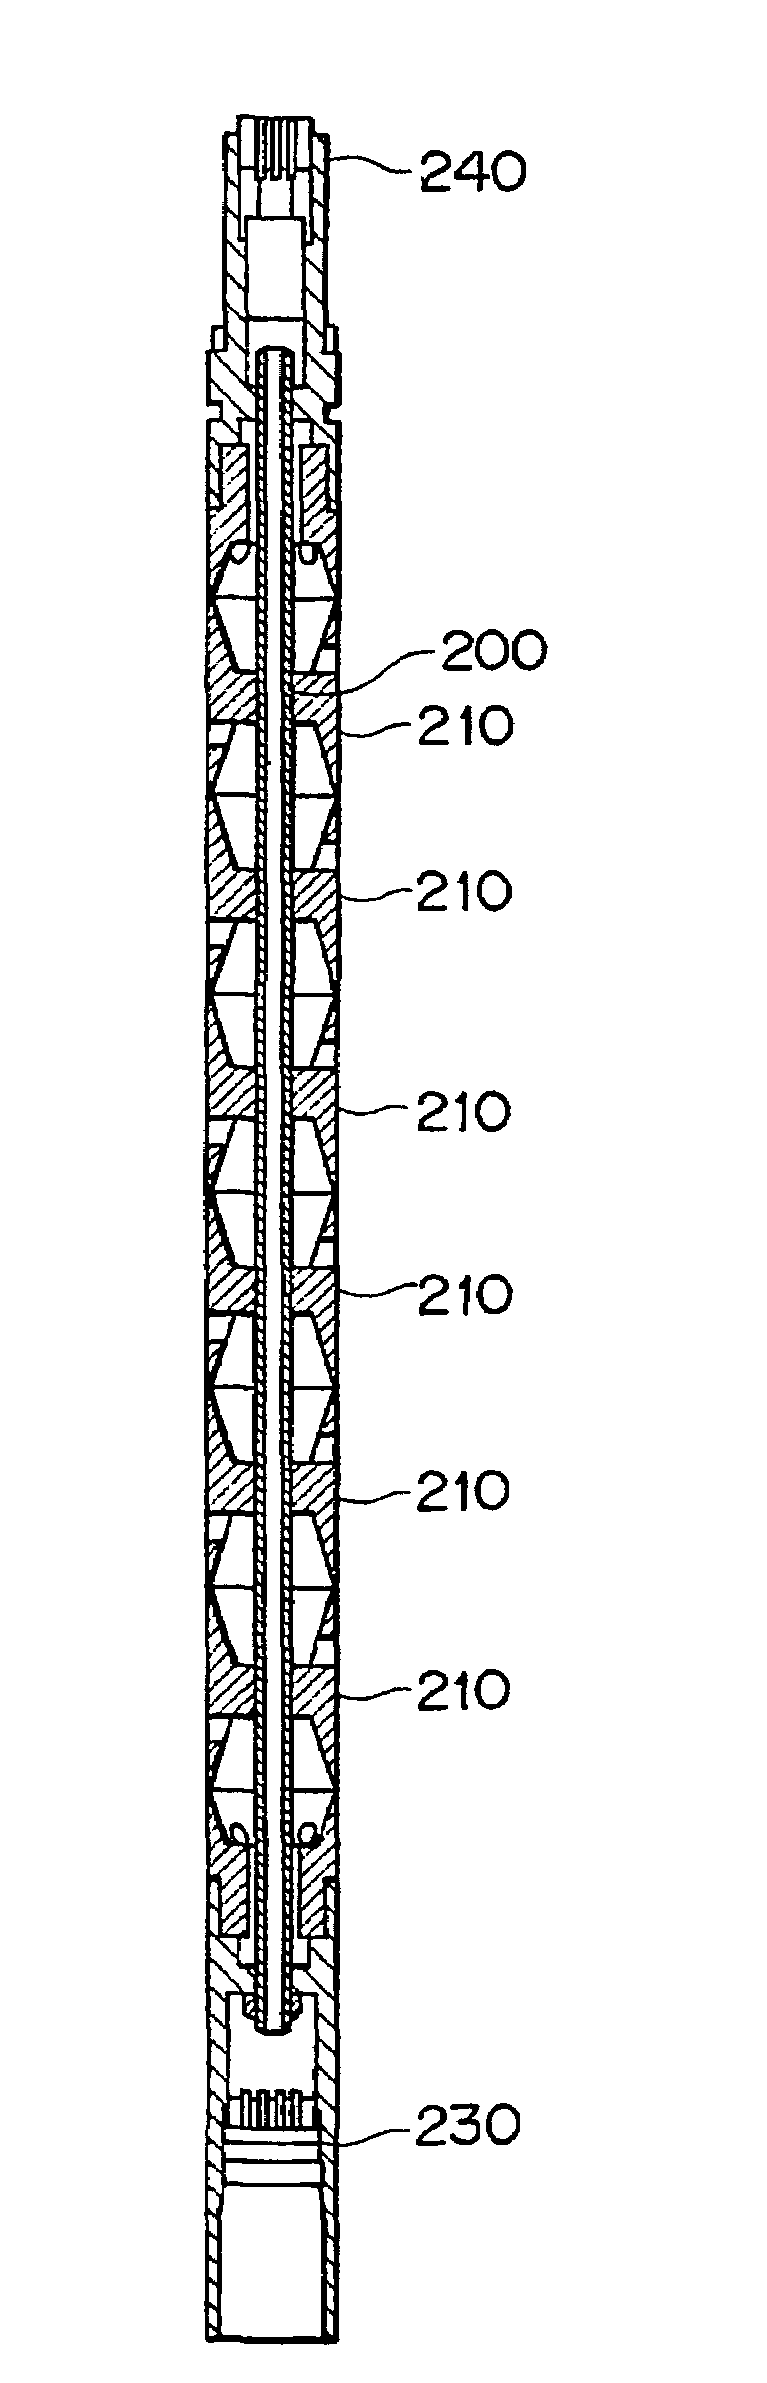 Sonic logging tool including receiver and spacer structure